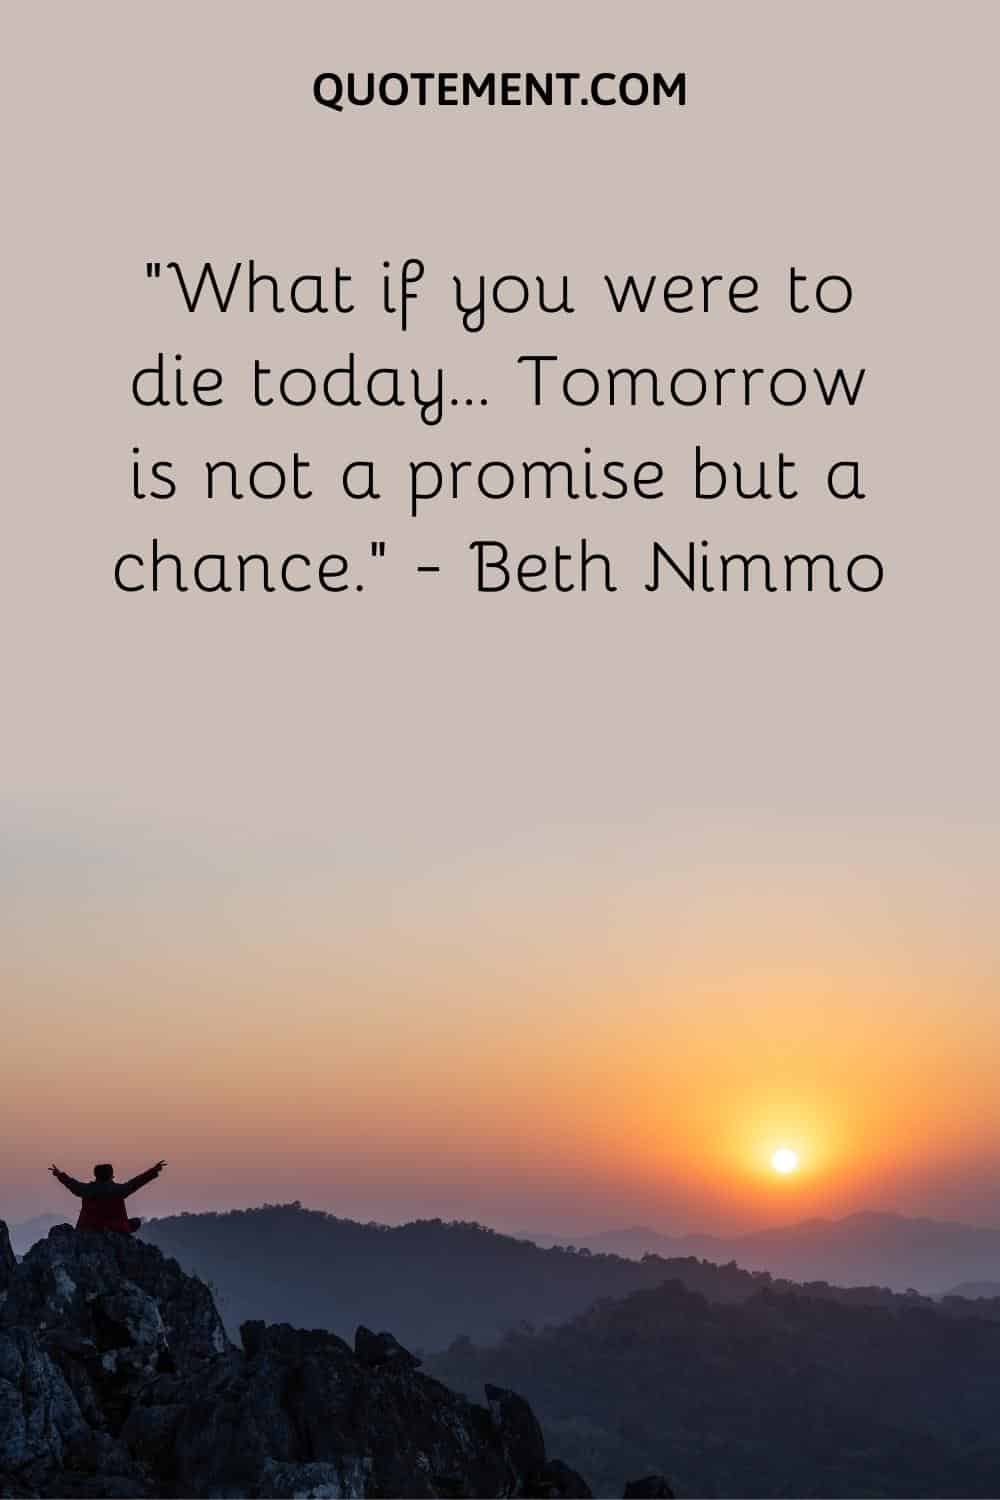 What if you were to die today… Tomorrow is not a promise but a chance